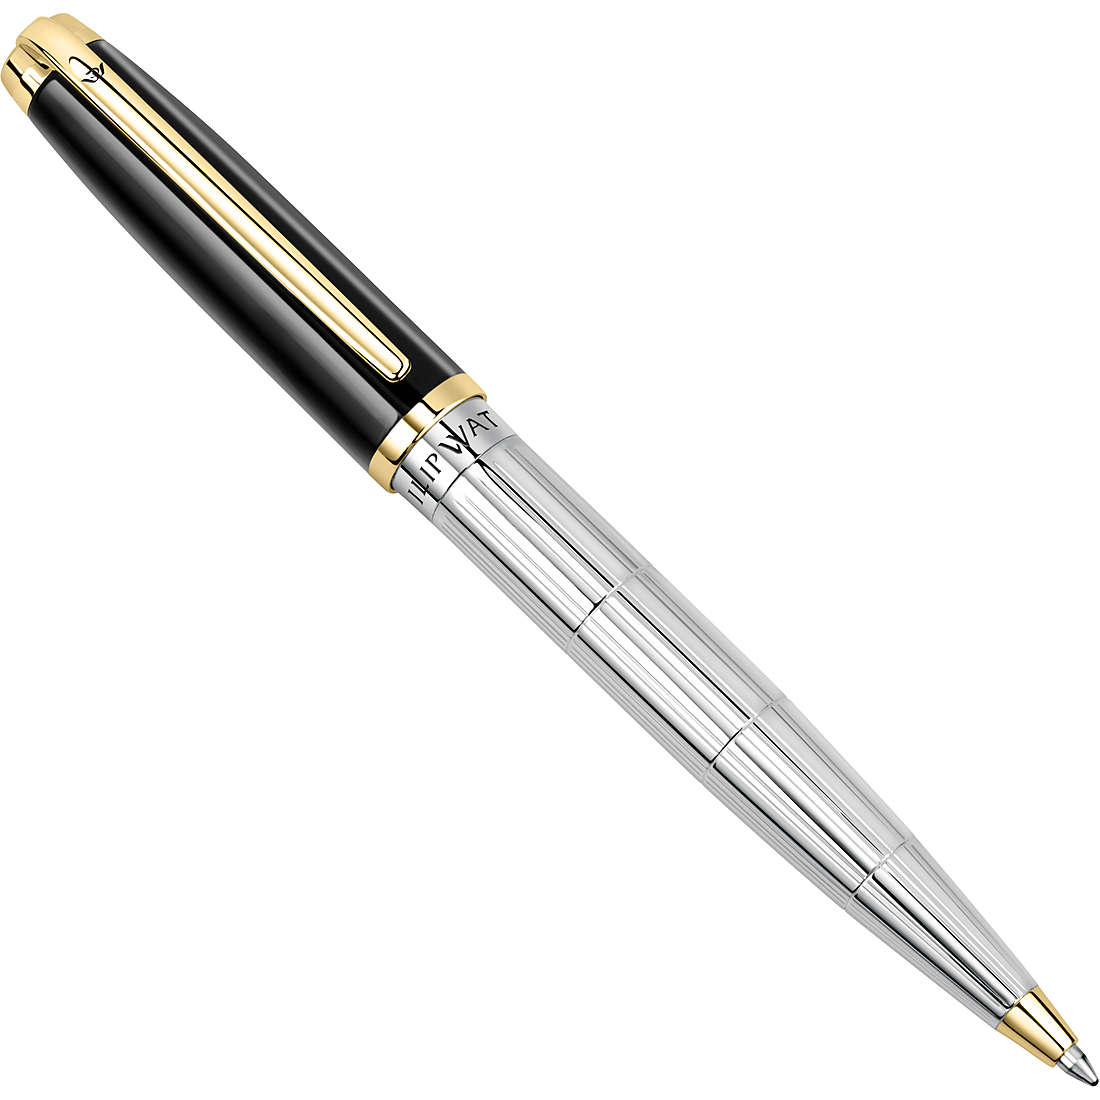 Customized pen with ballpoint by Philip Watch Writing Instrument J820628